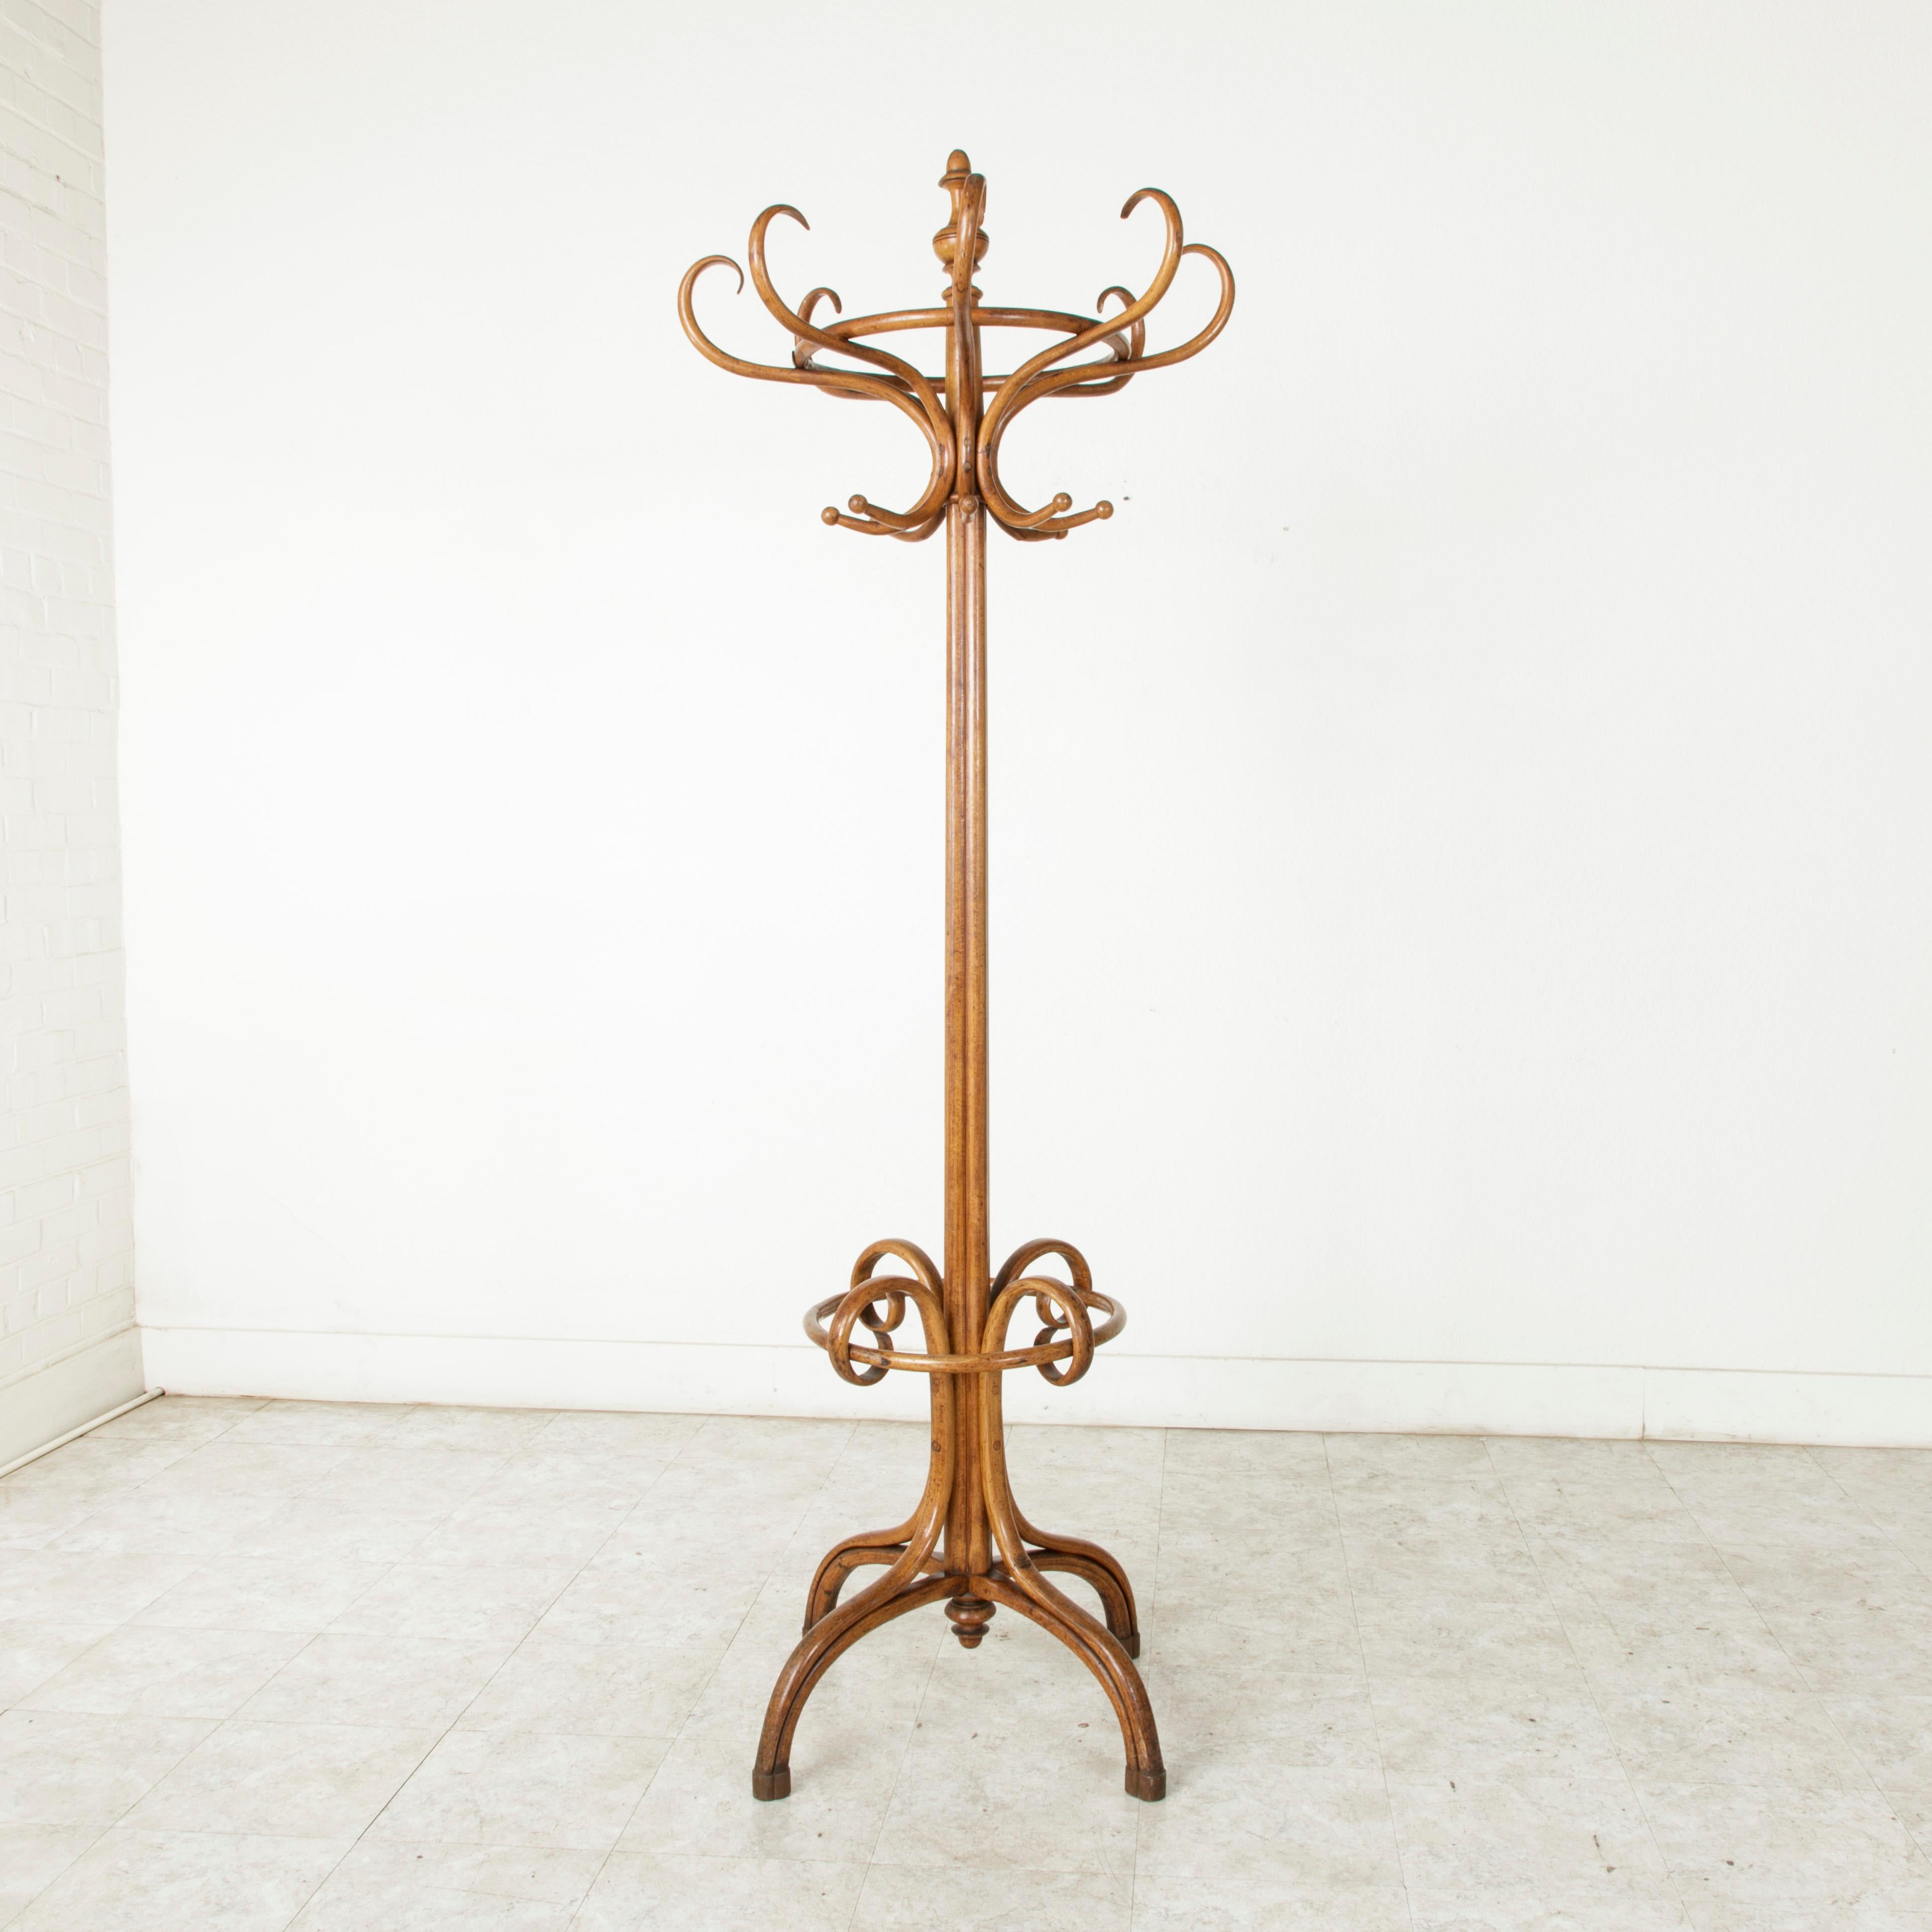 This classic Thonet style hat and coat rack or hall tree is made of richly finished bent beech wood. It features sixteen hat and coat hooks and an umbrella holder below. A familiar fixture in the turn-of-the-century French bistro, this piece will